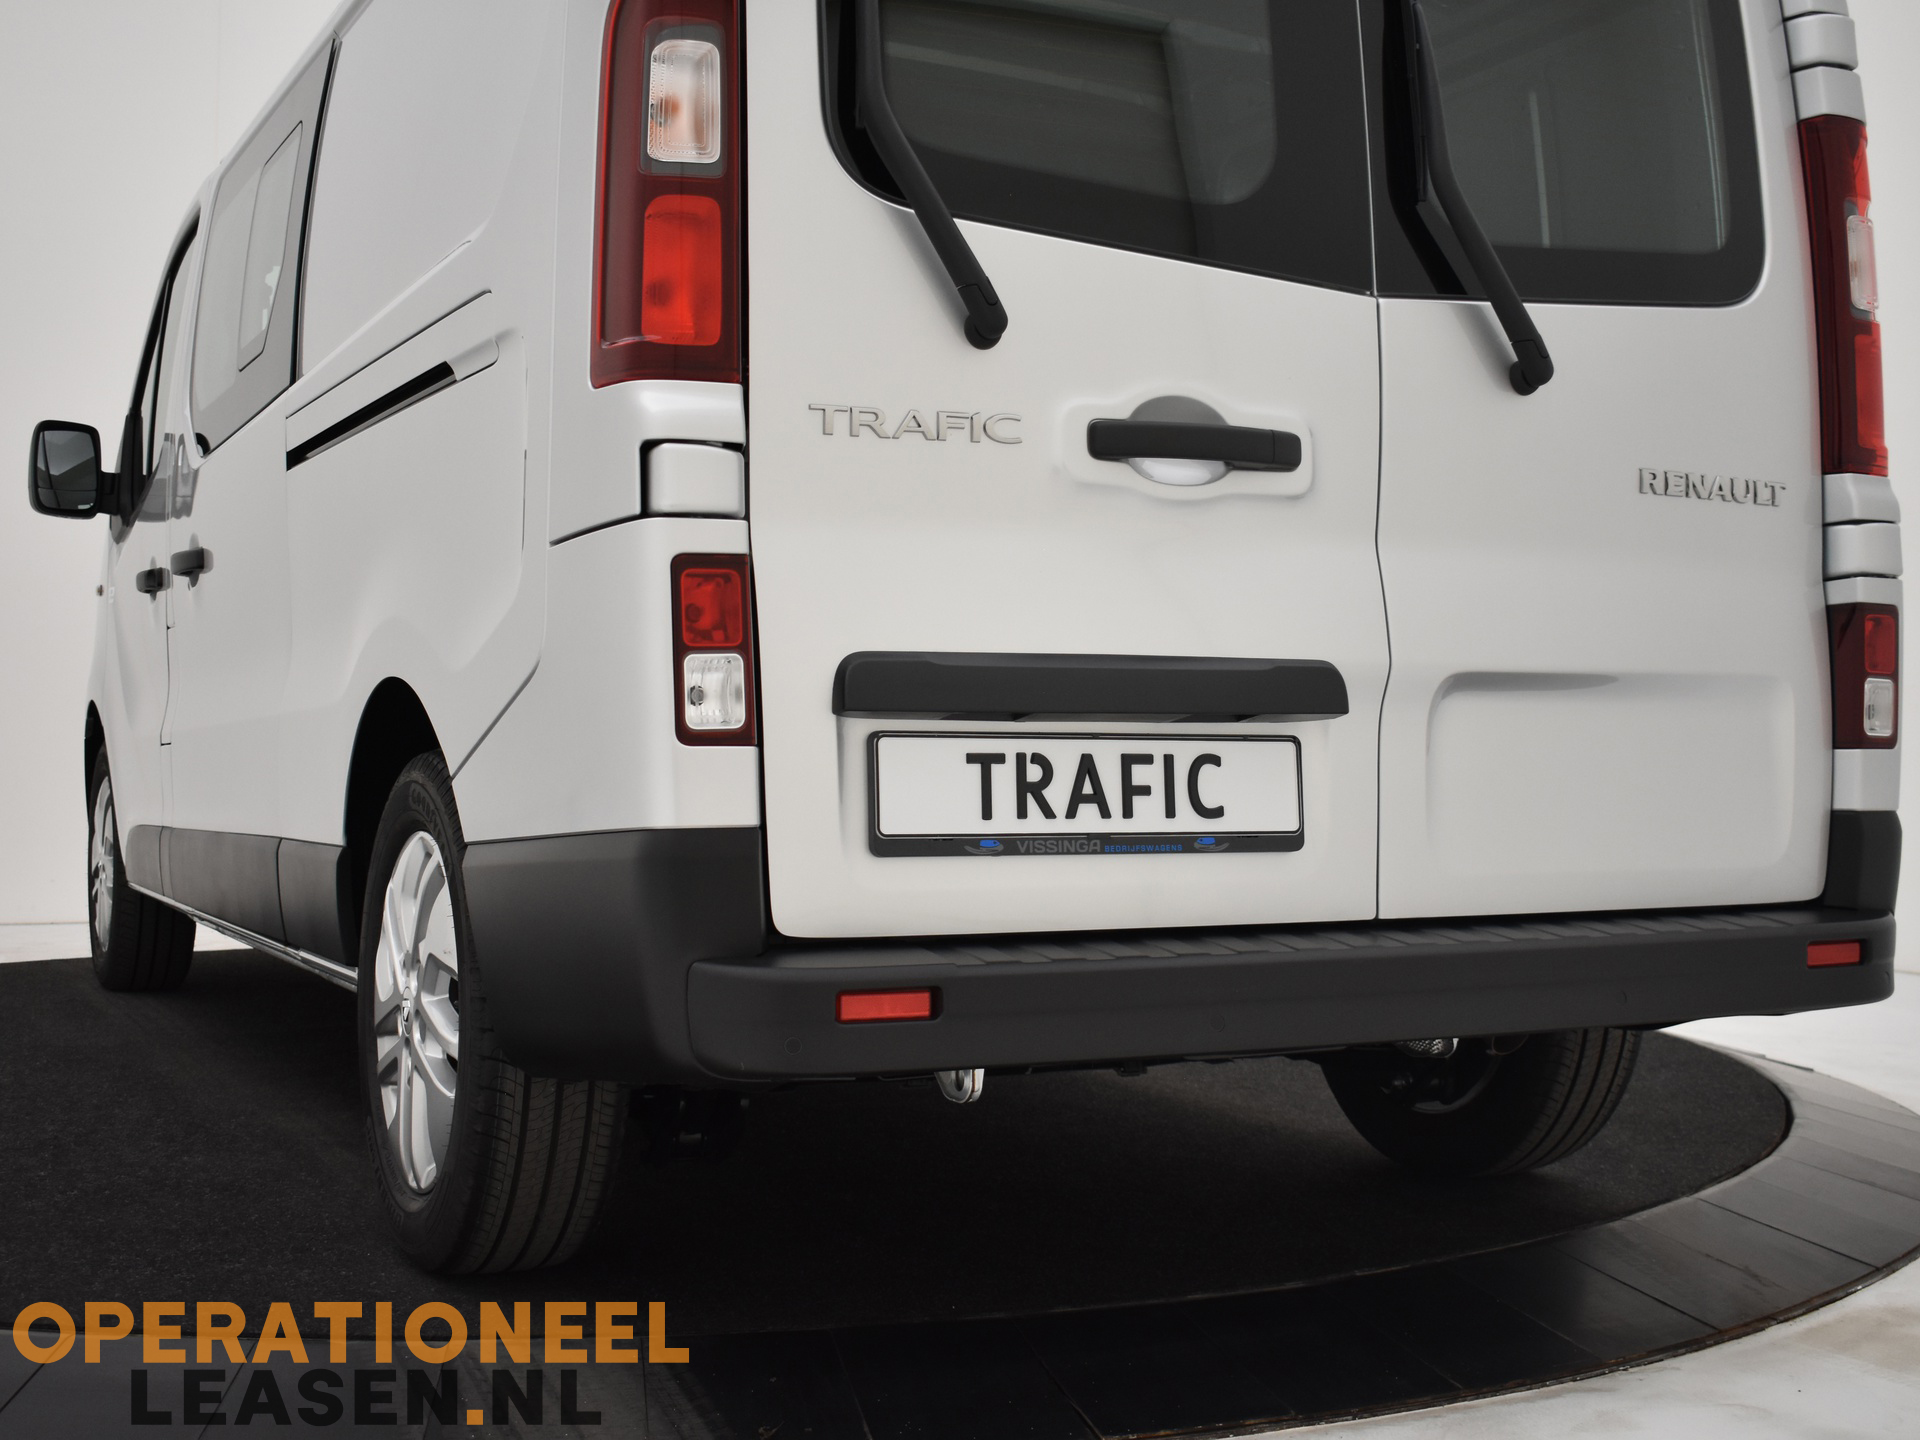 Operational lease Renault master traffic-28